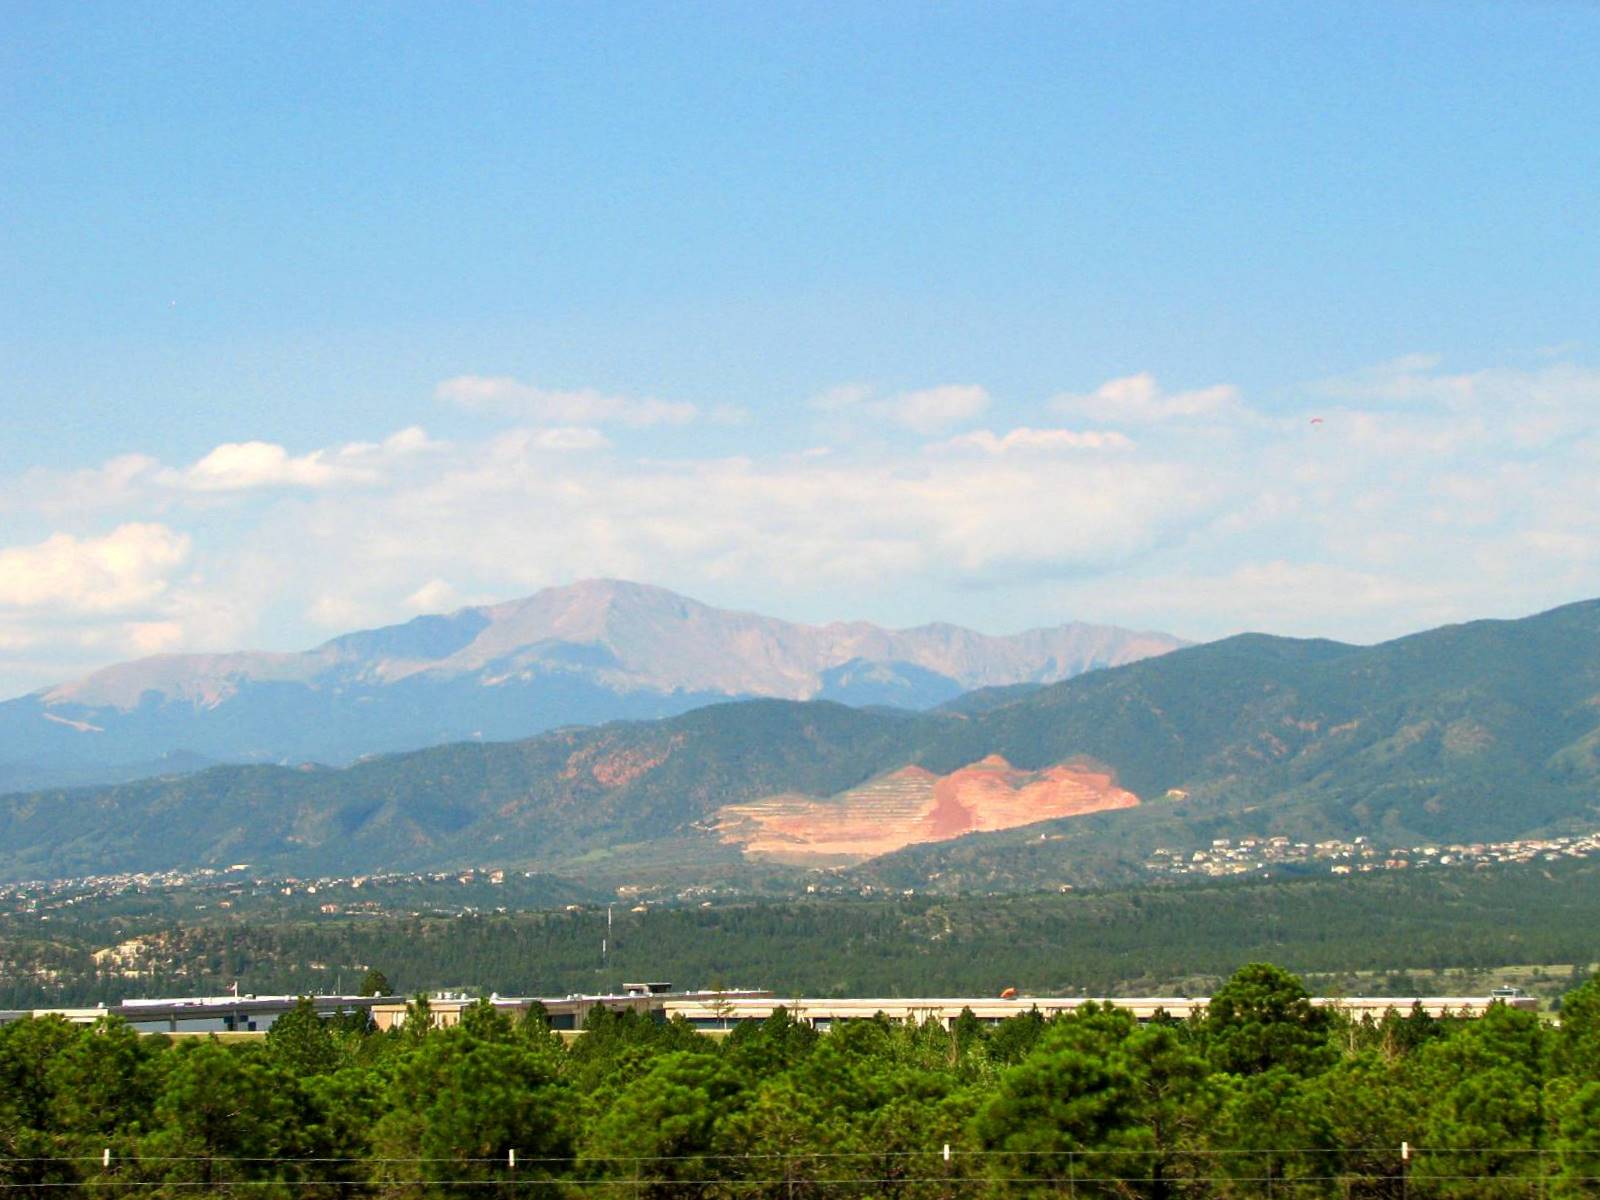 a view of the mountains in the distance with trees all around